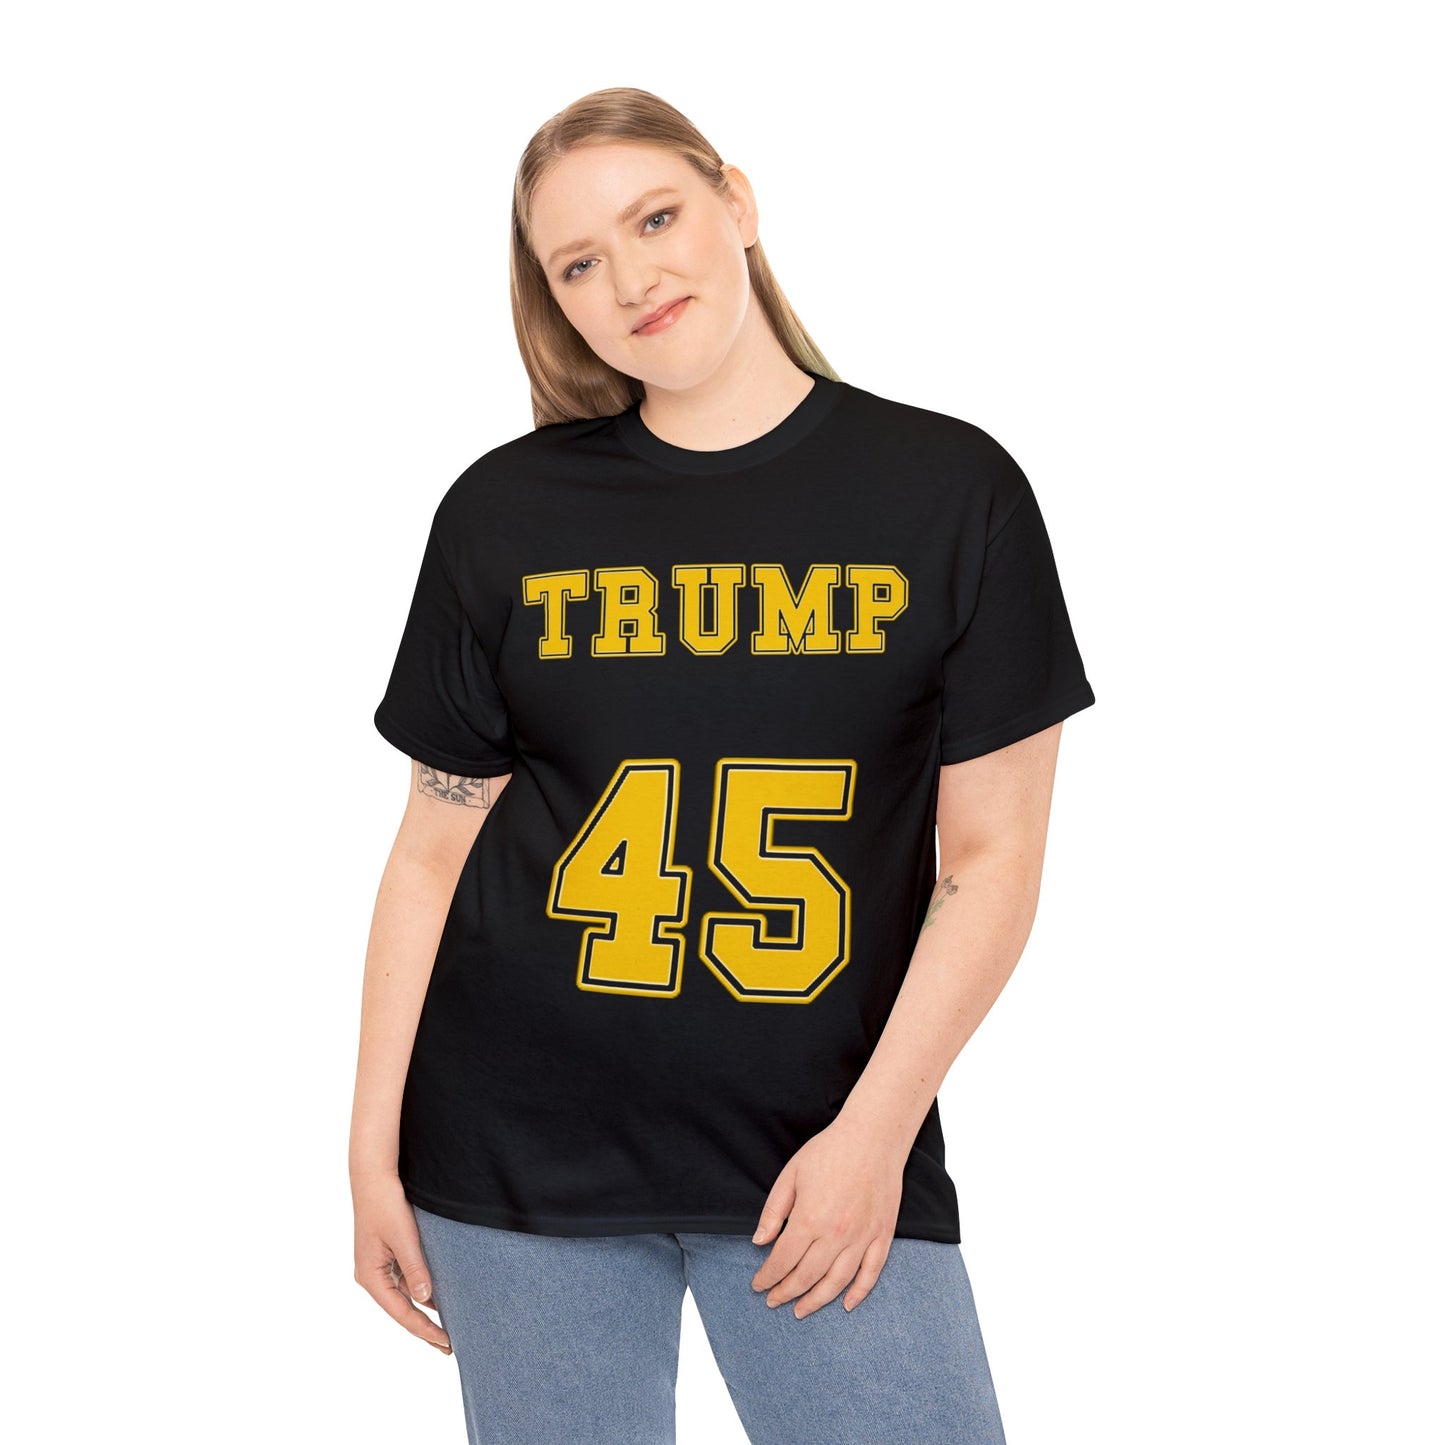 Trump 45 on front and Trump 47 on the back Shirt Trump Merch